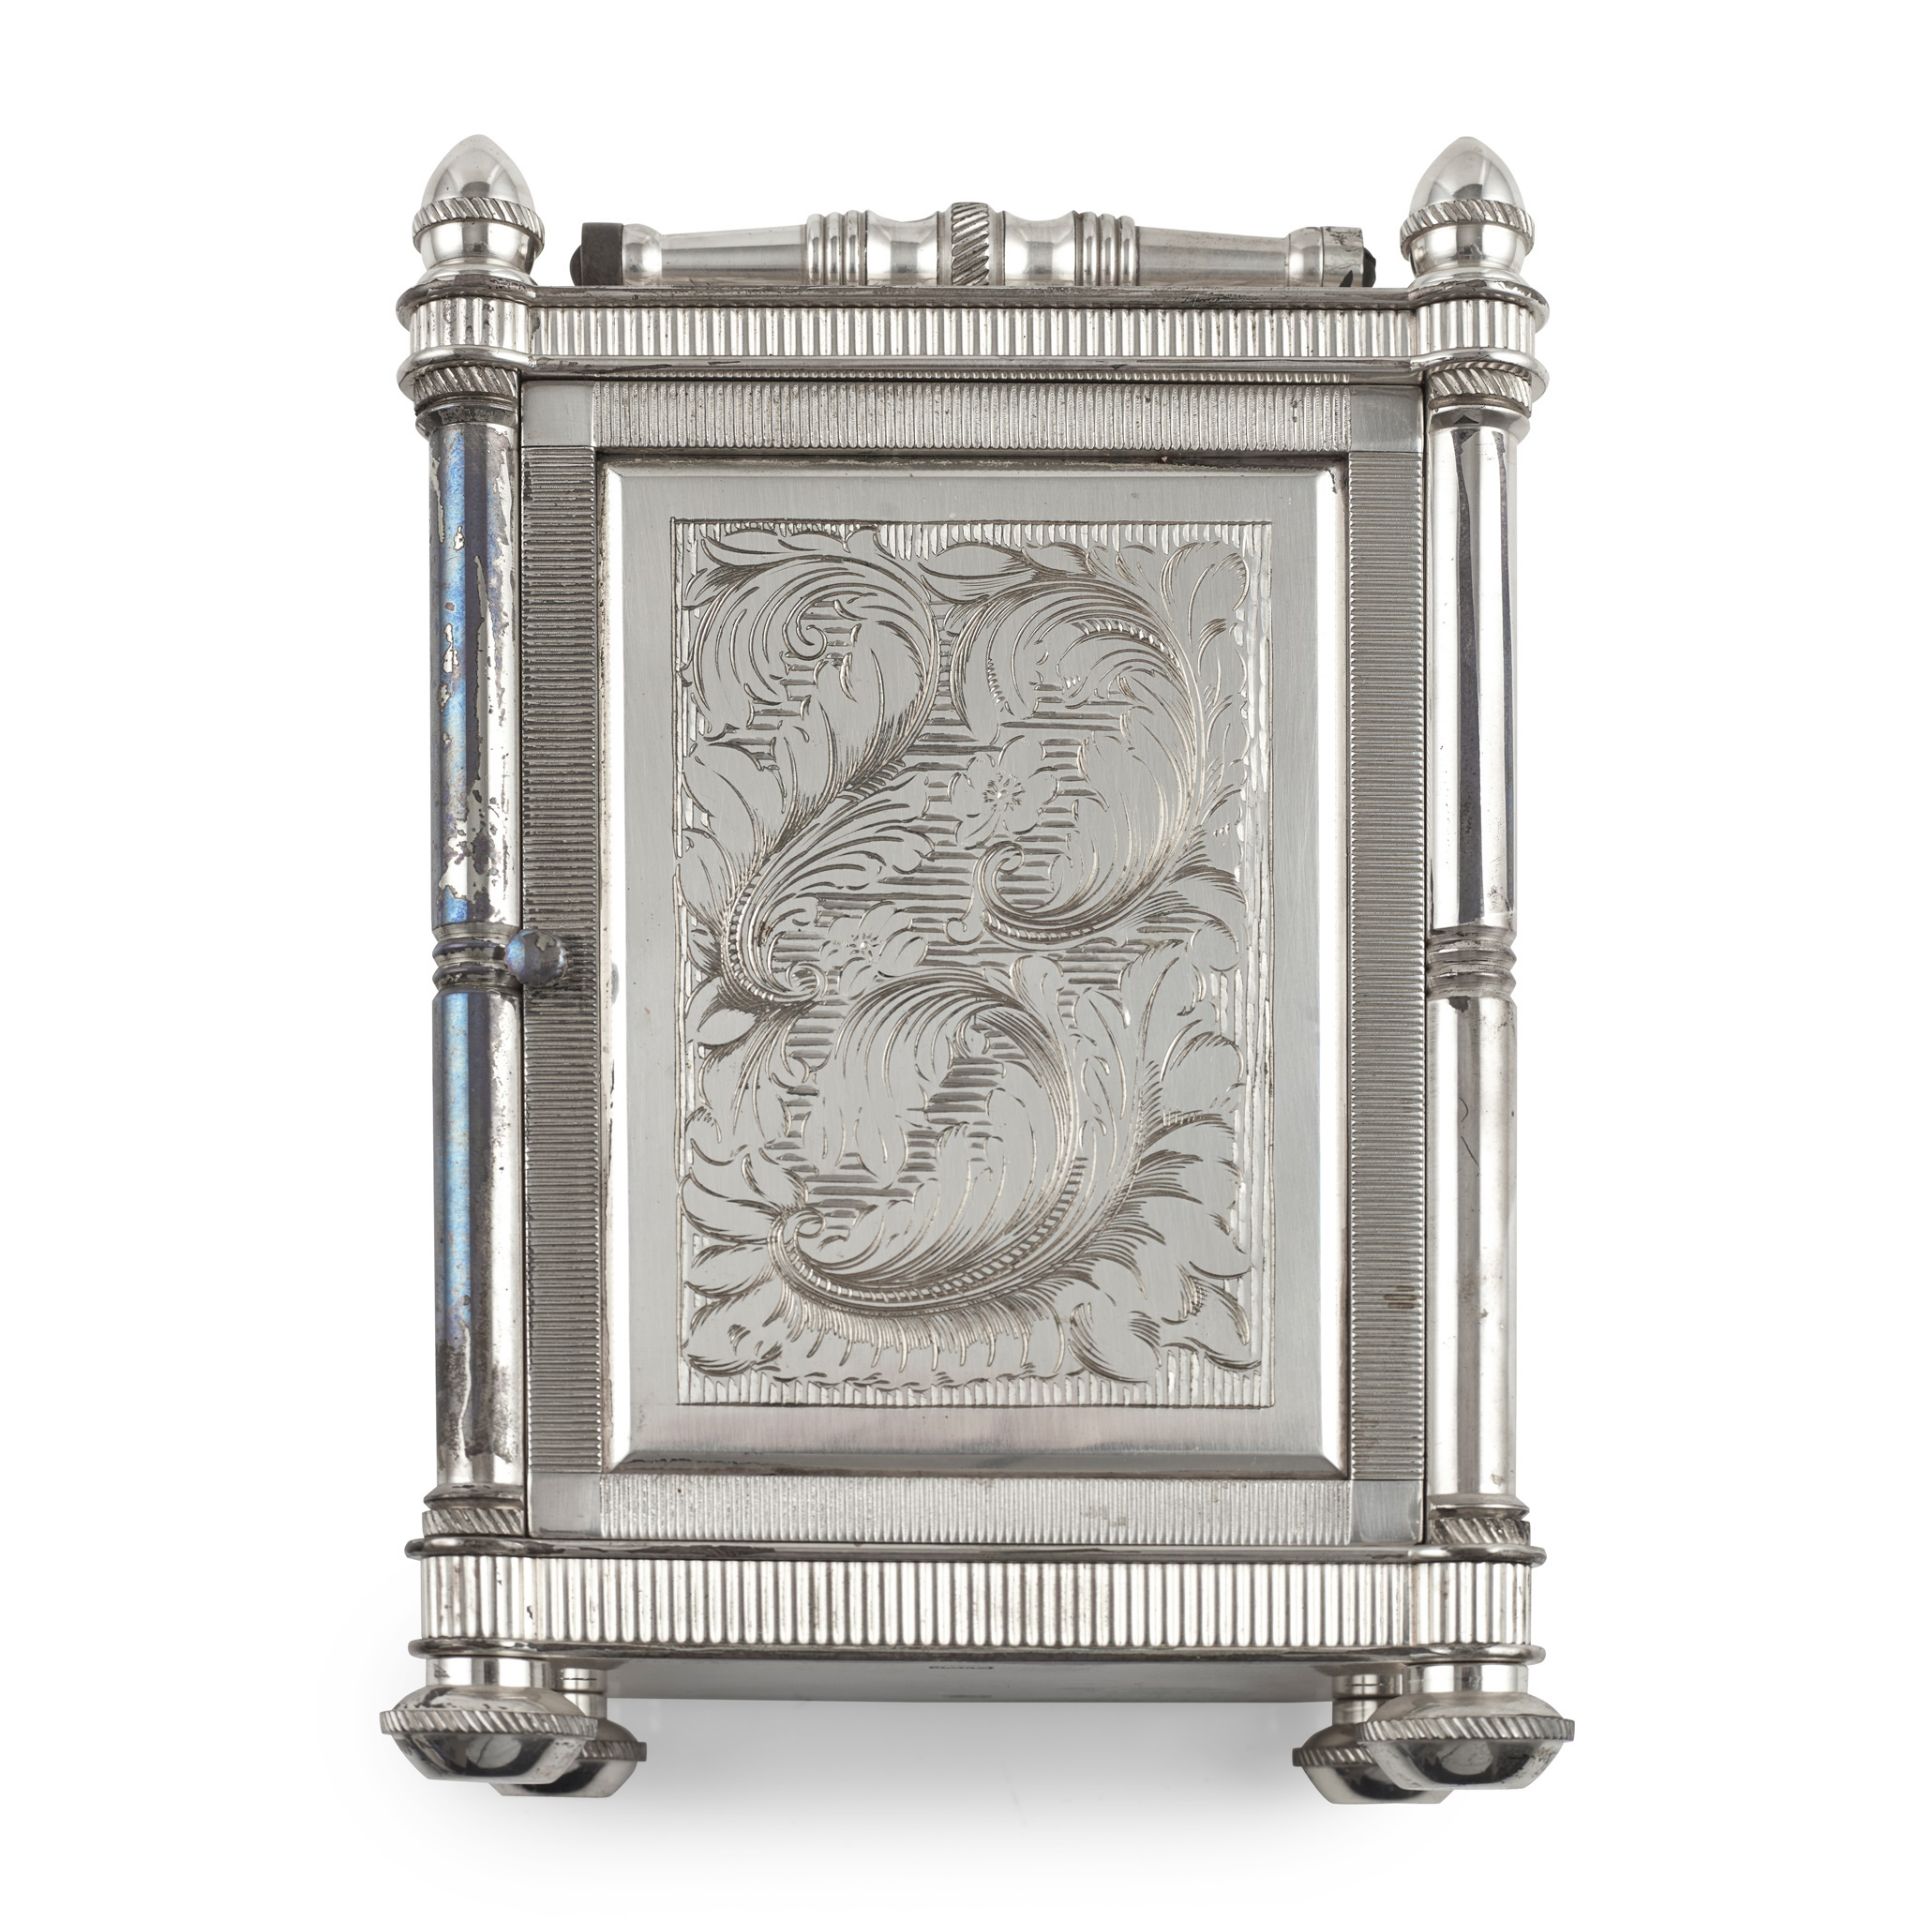 The Mappin & Webb Bi-centenary carriage clock - Image 3 of 4